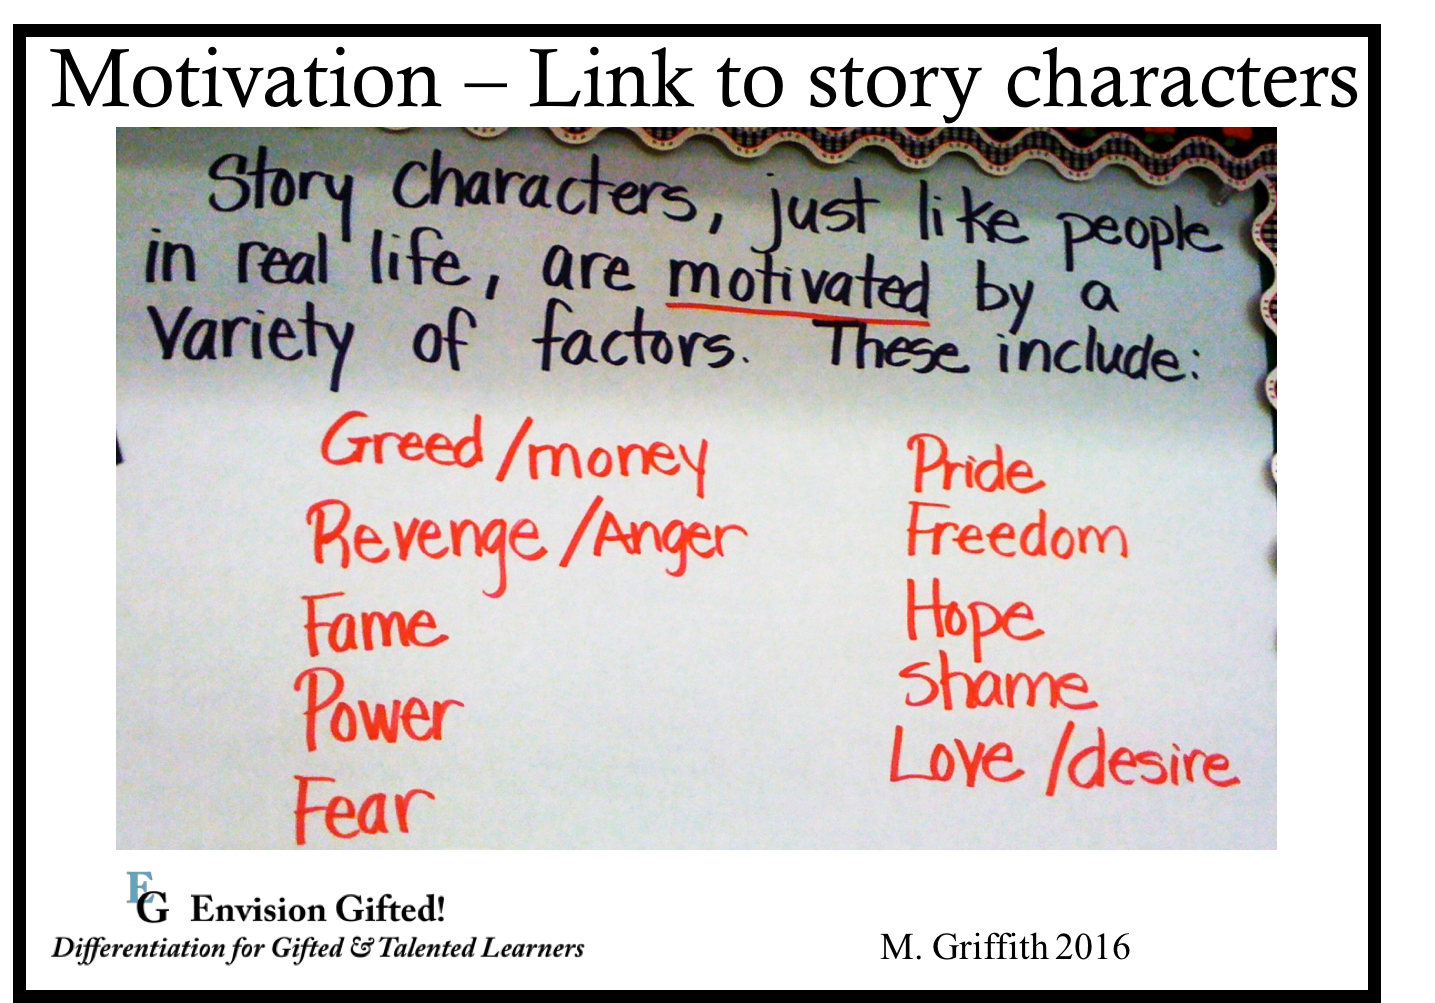 Envision Gifted. Motivation- Link to story characters